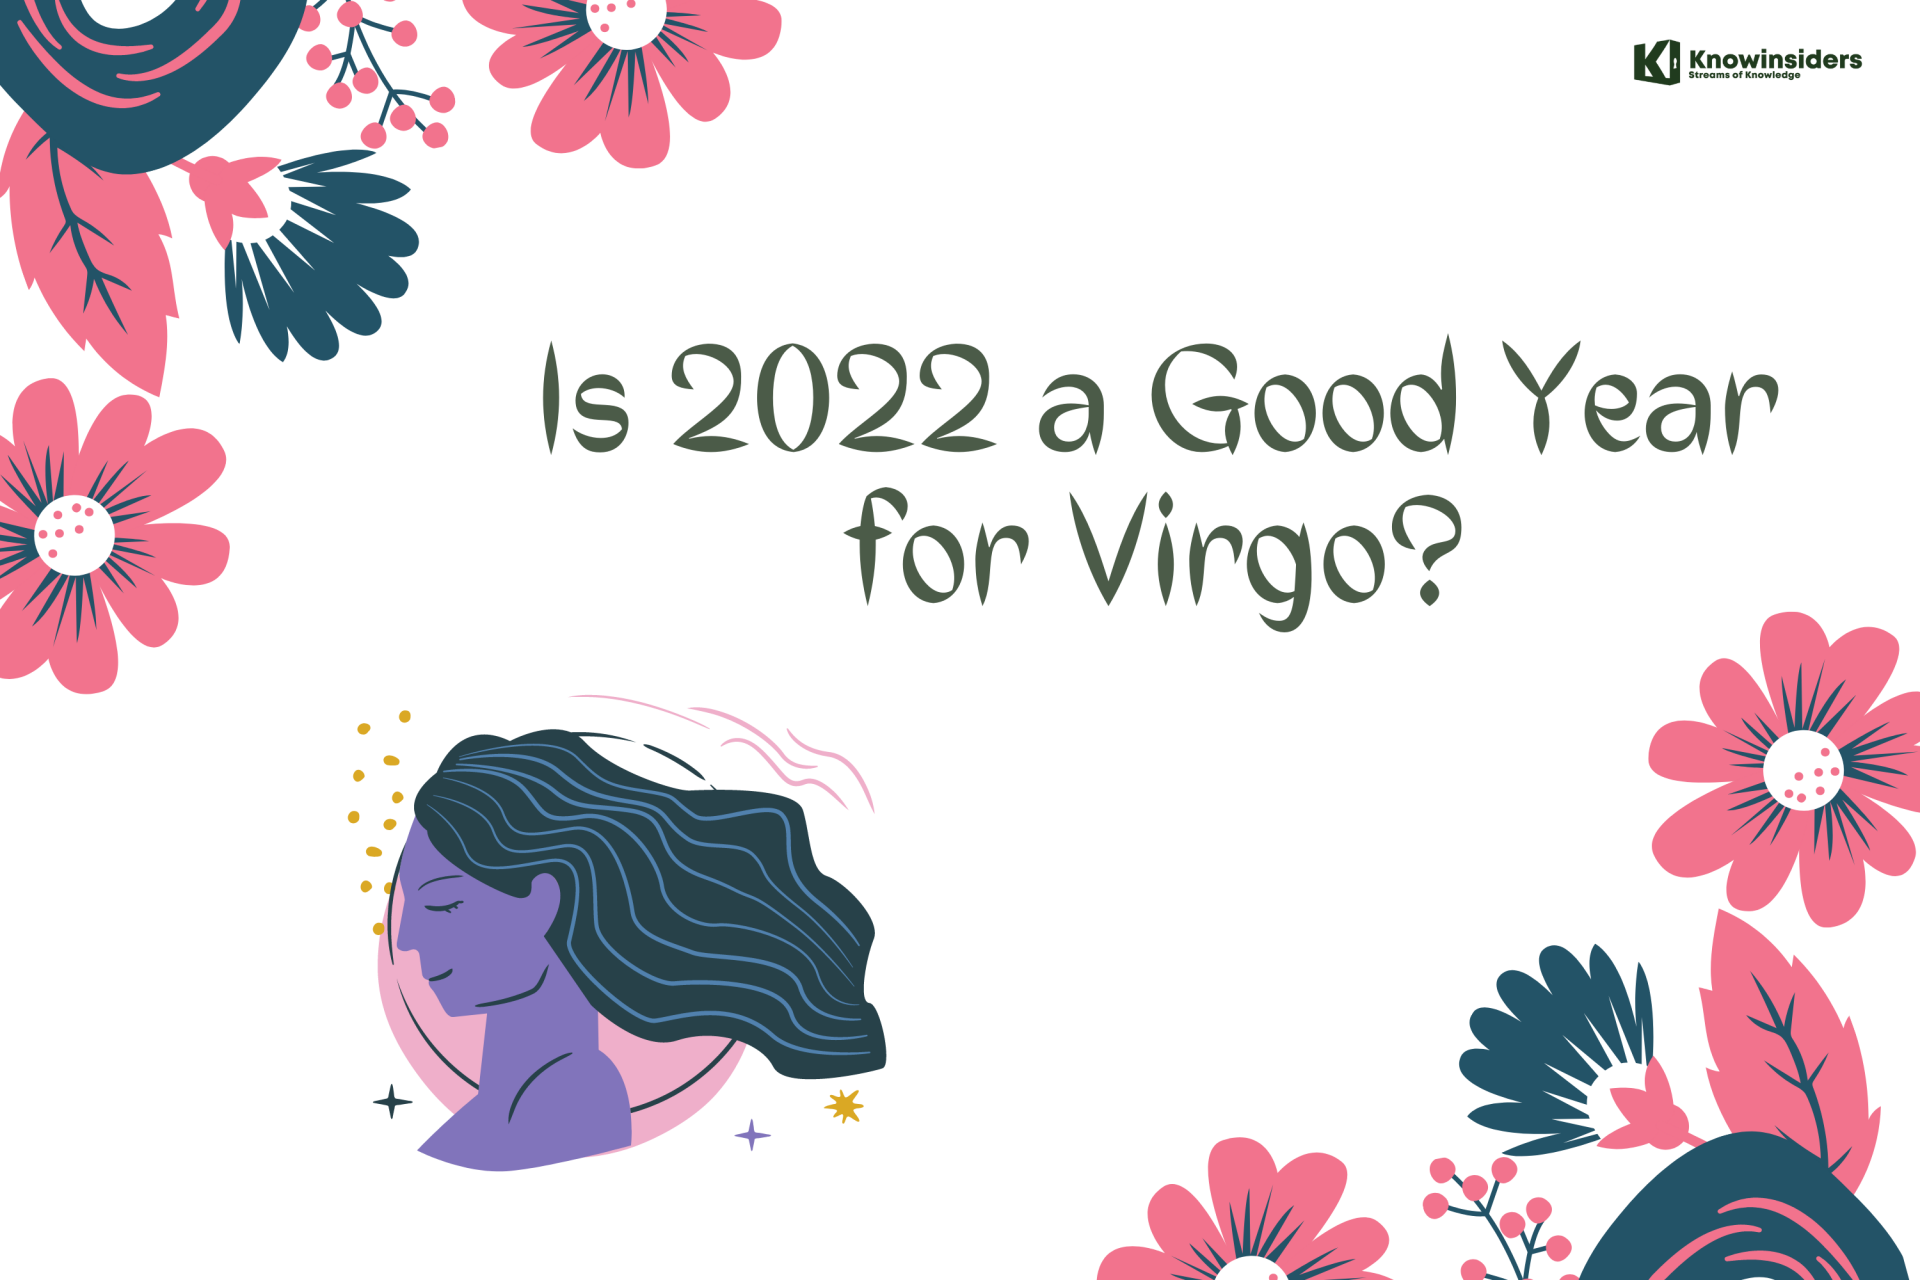 is 2022 a good year for virgo